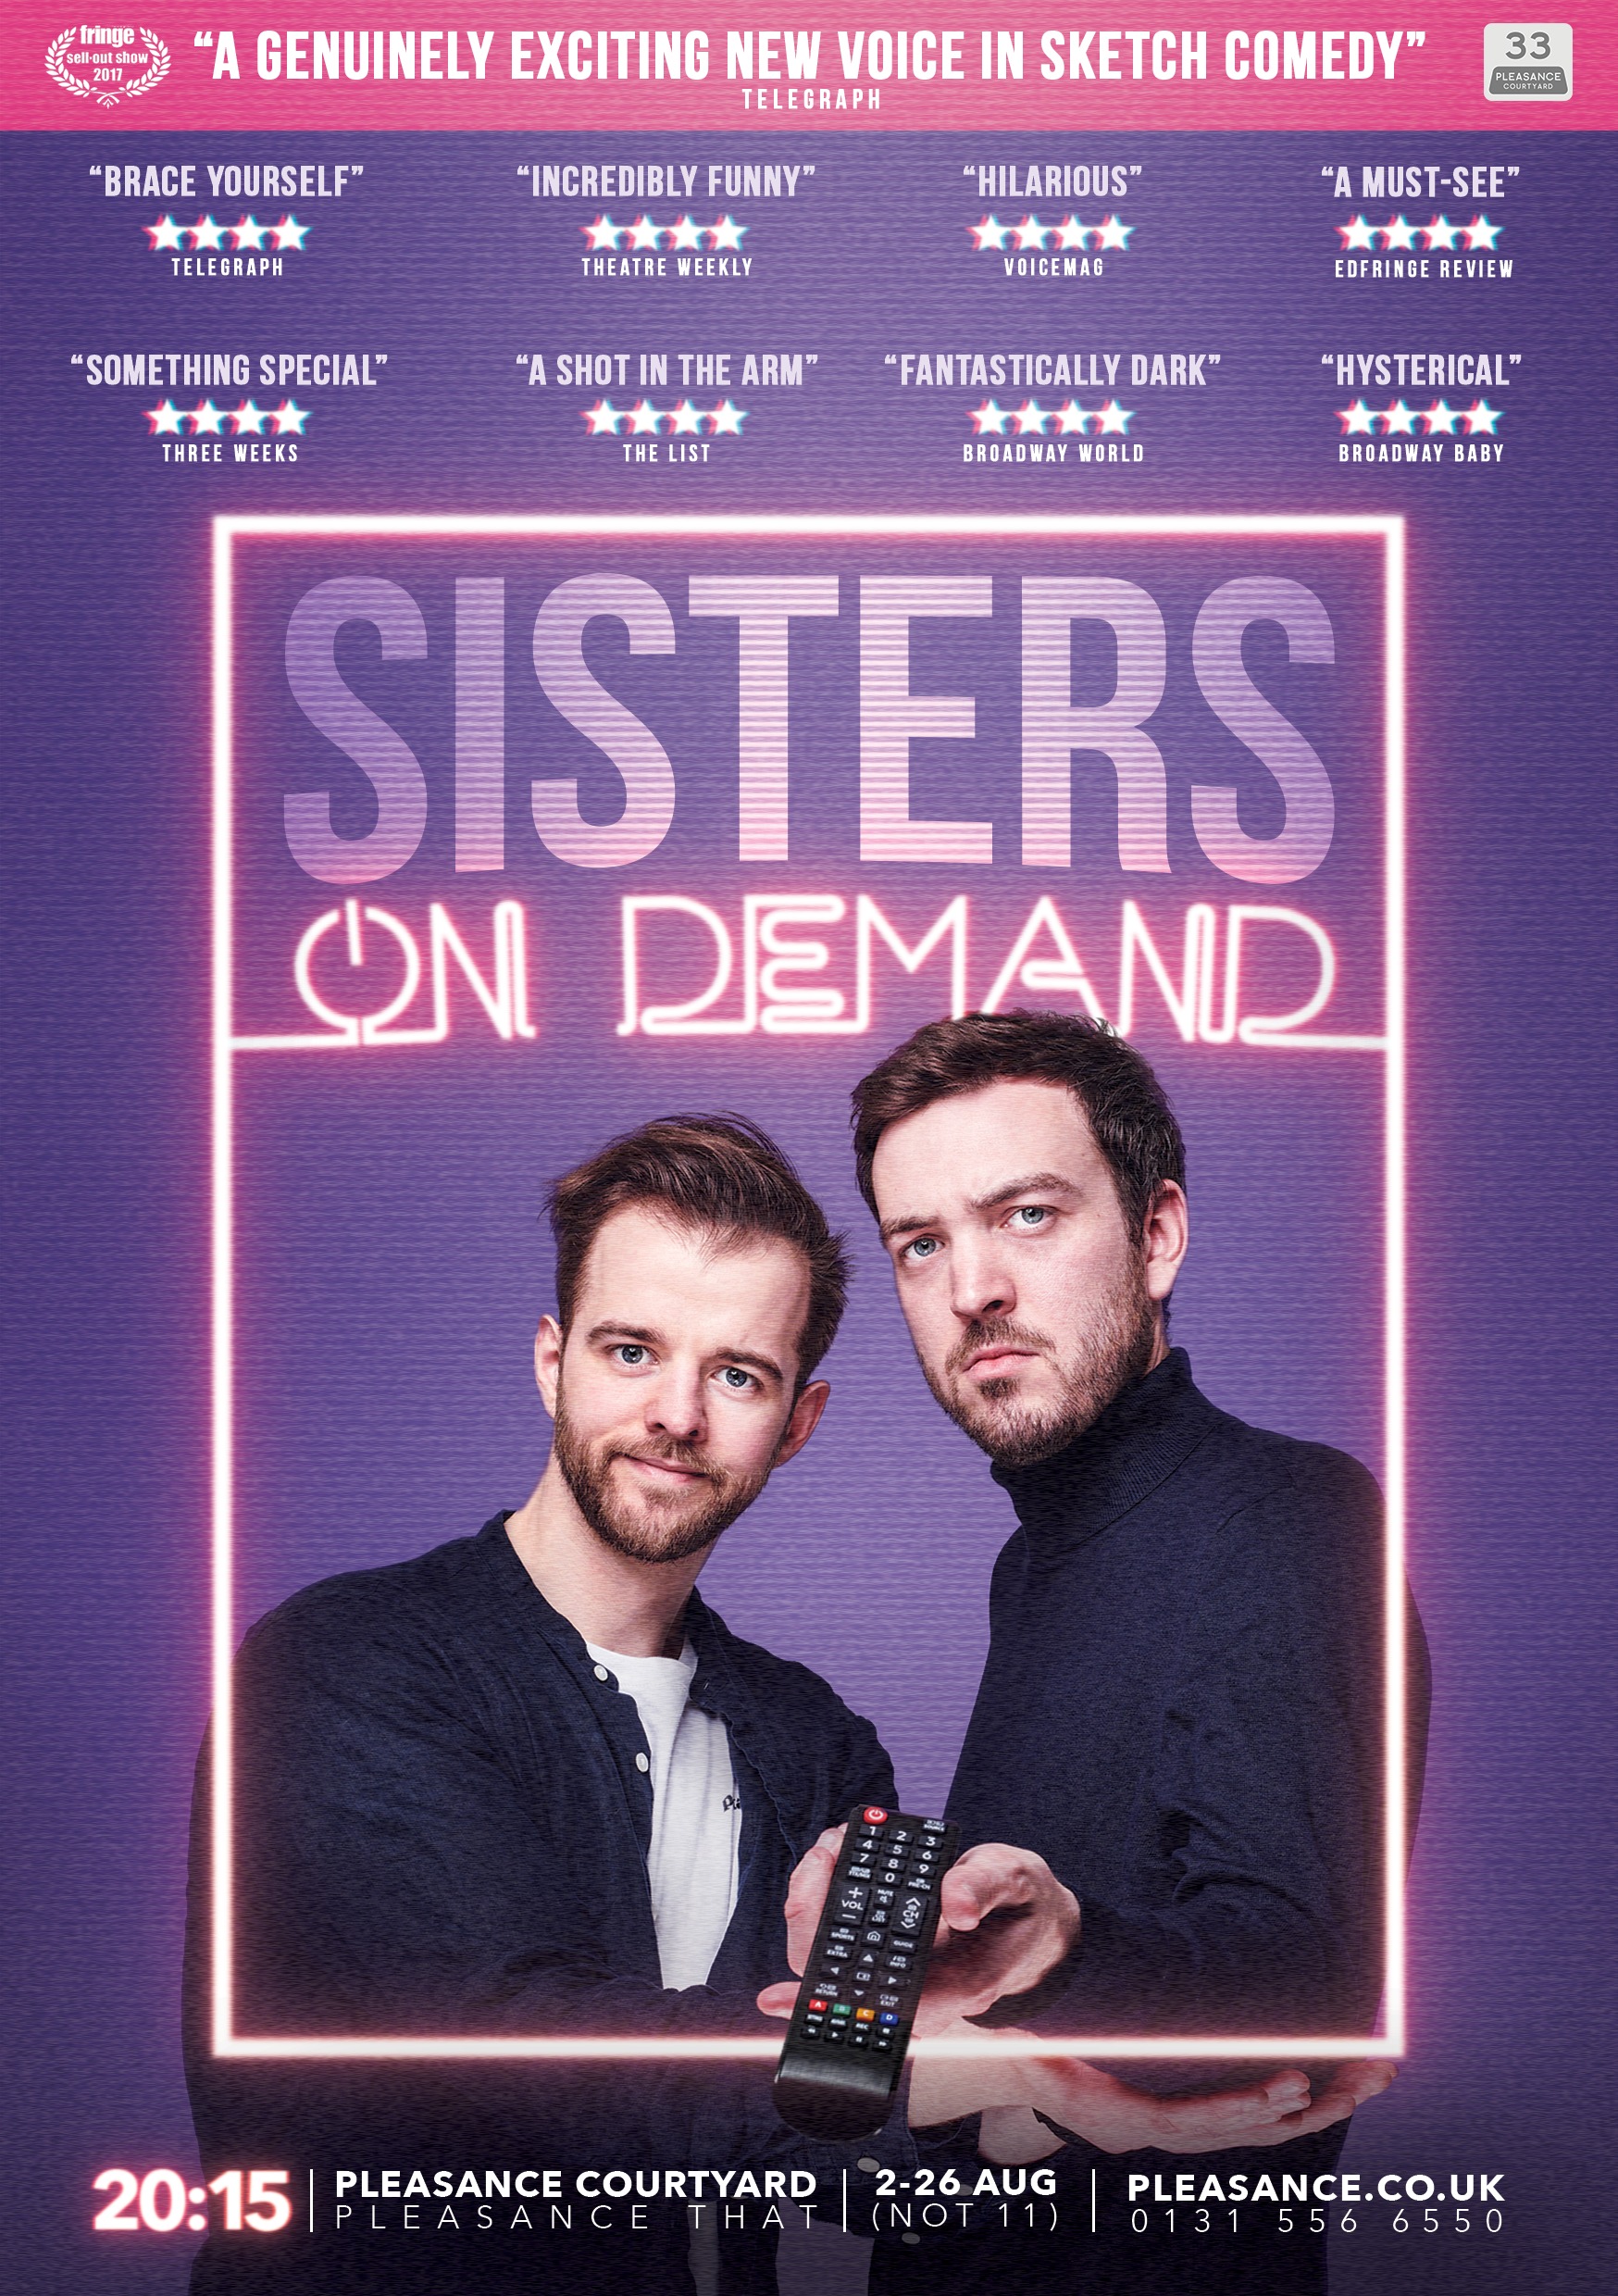 The poster for Sisters: On Demand